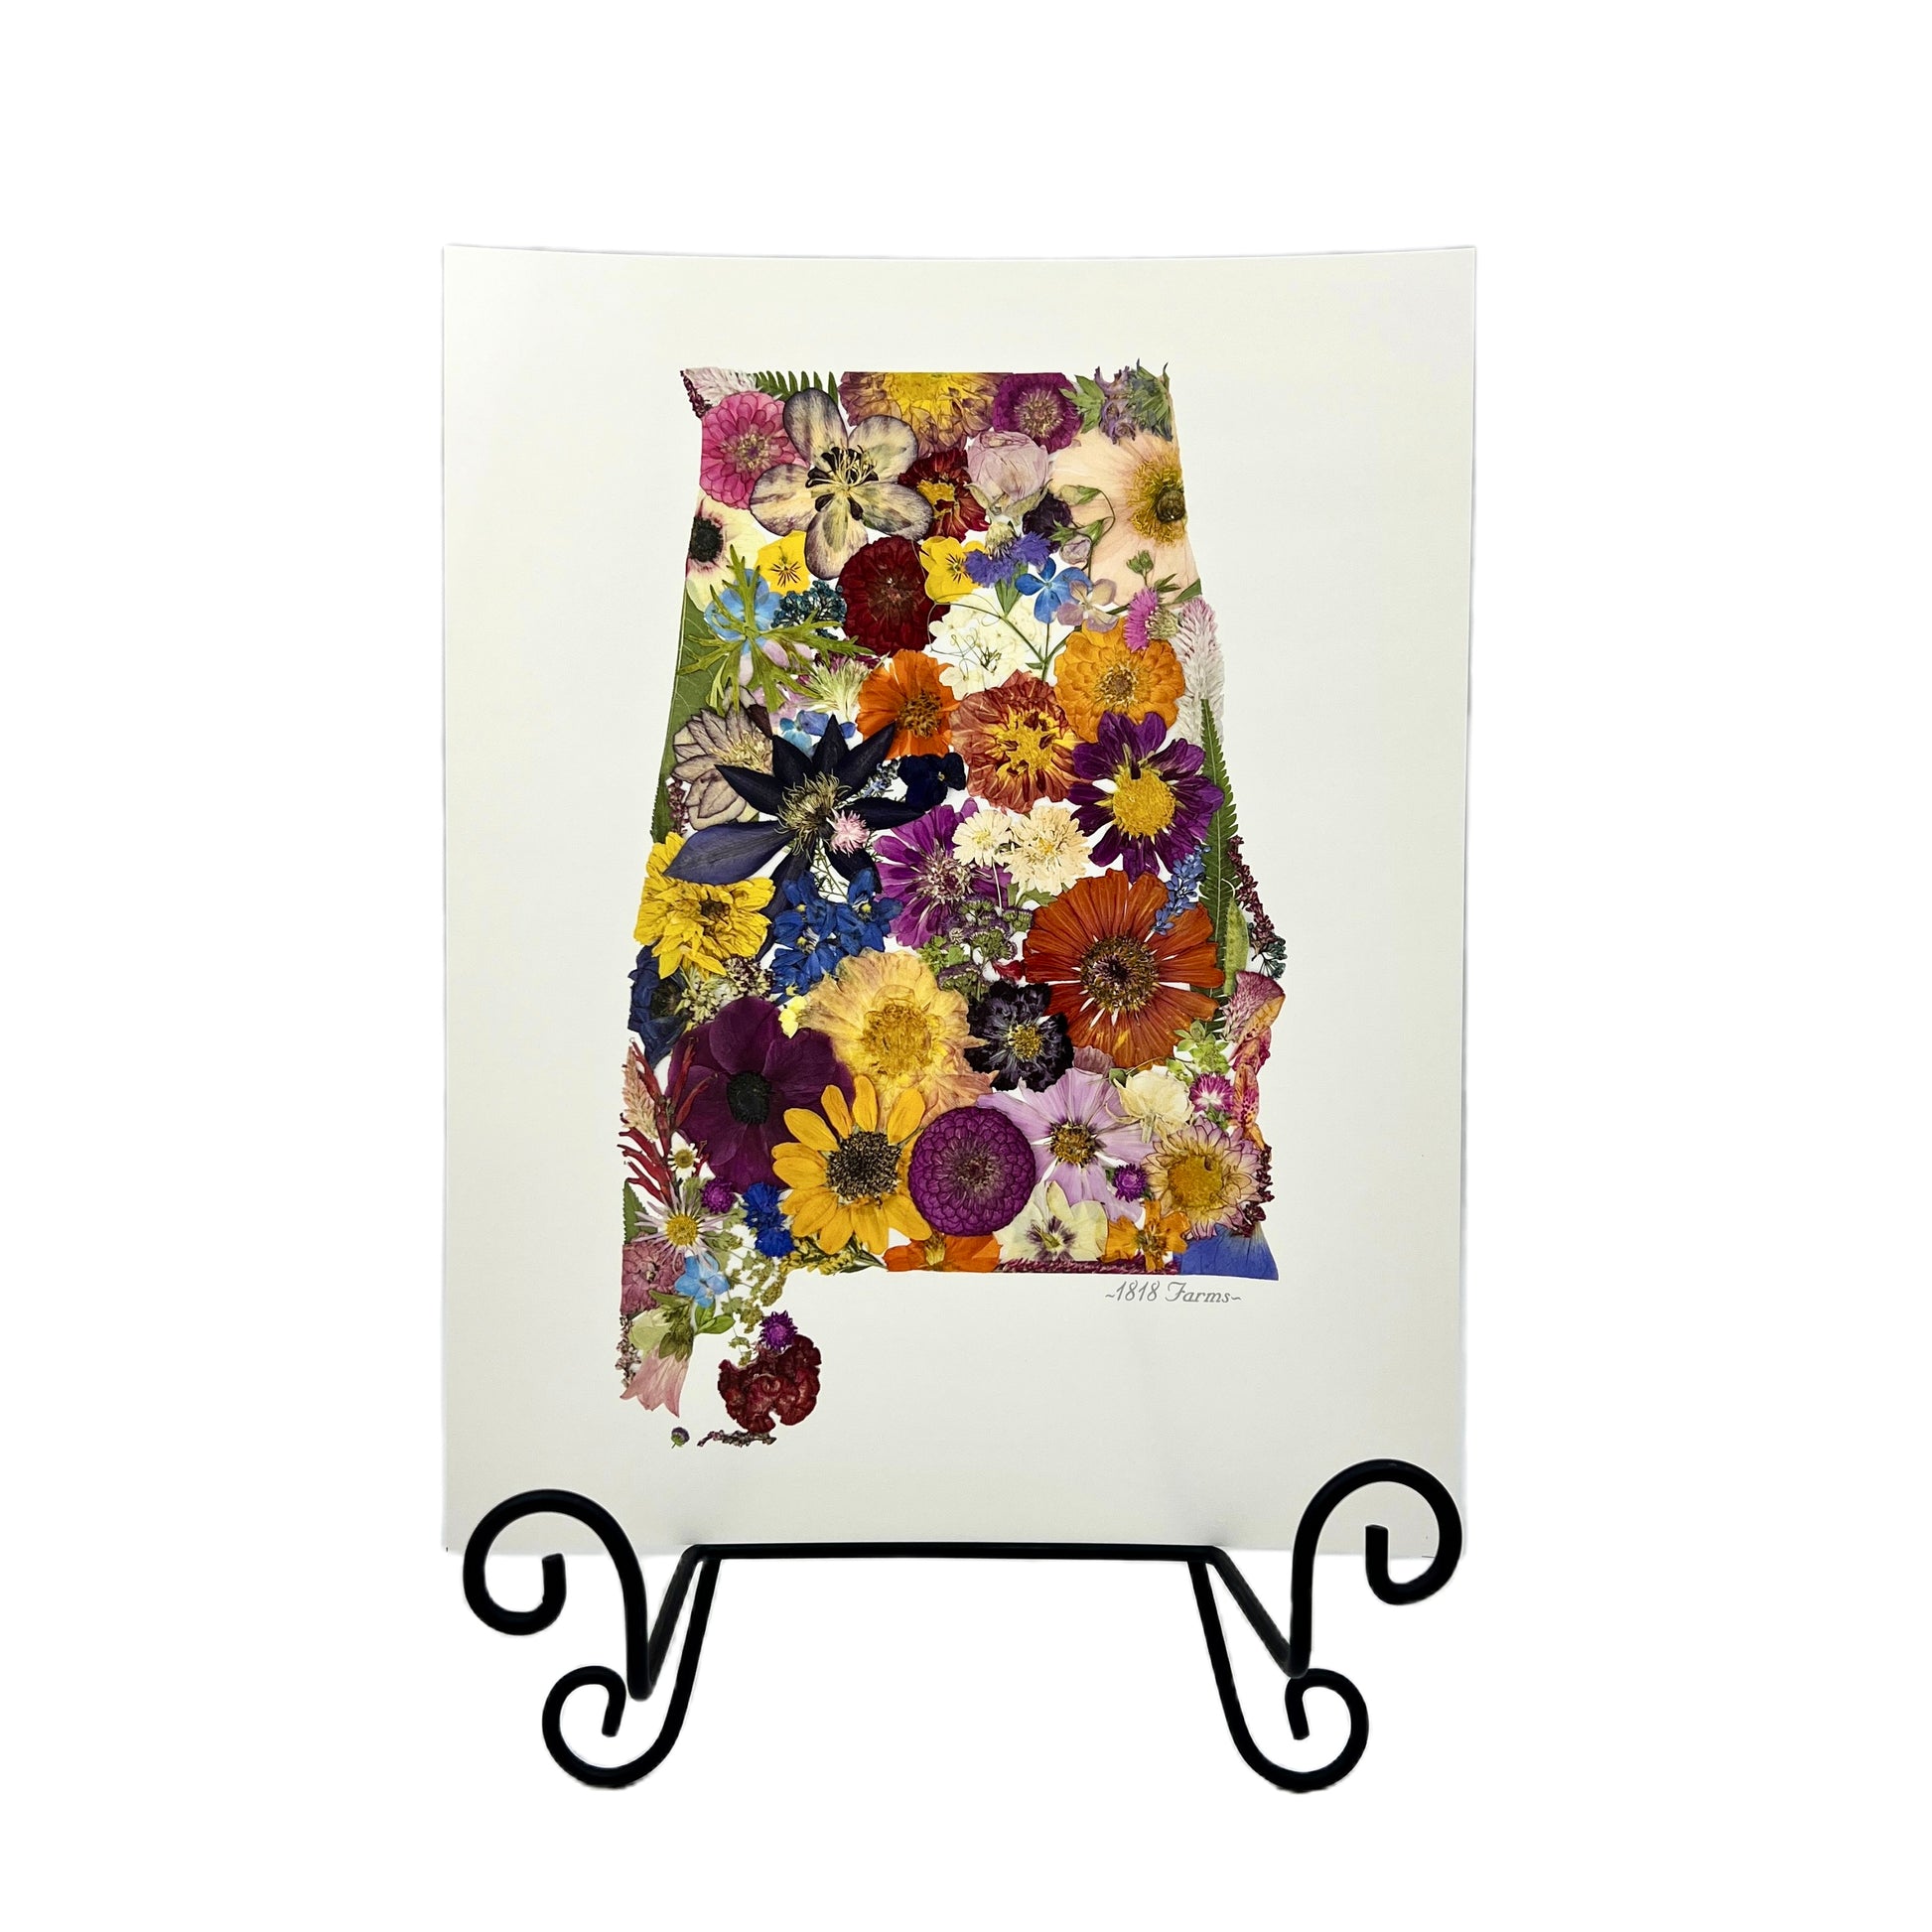 Alabama Themed Giclée Print Featuring Dried, Pressed Flowers - "Where I Bloom" Collection Giclee Art Print 1818 Farms   